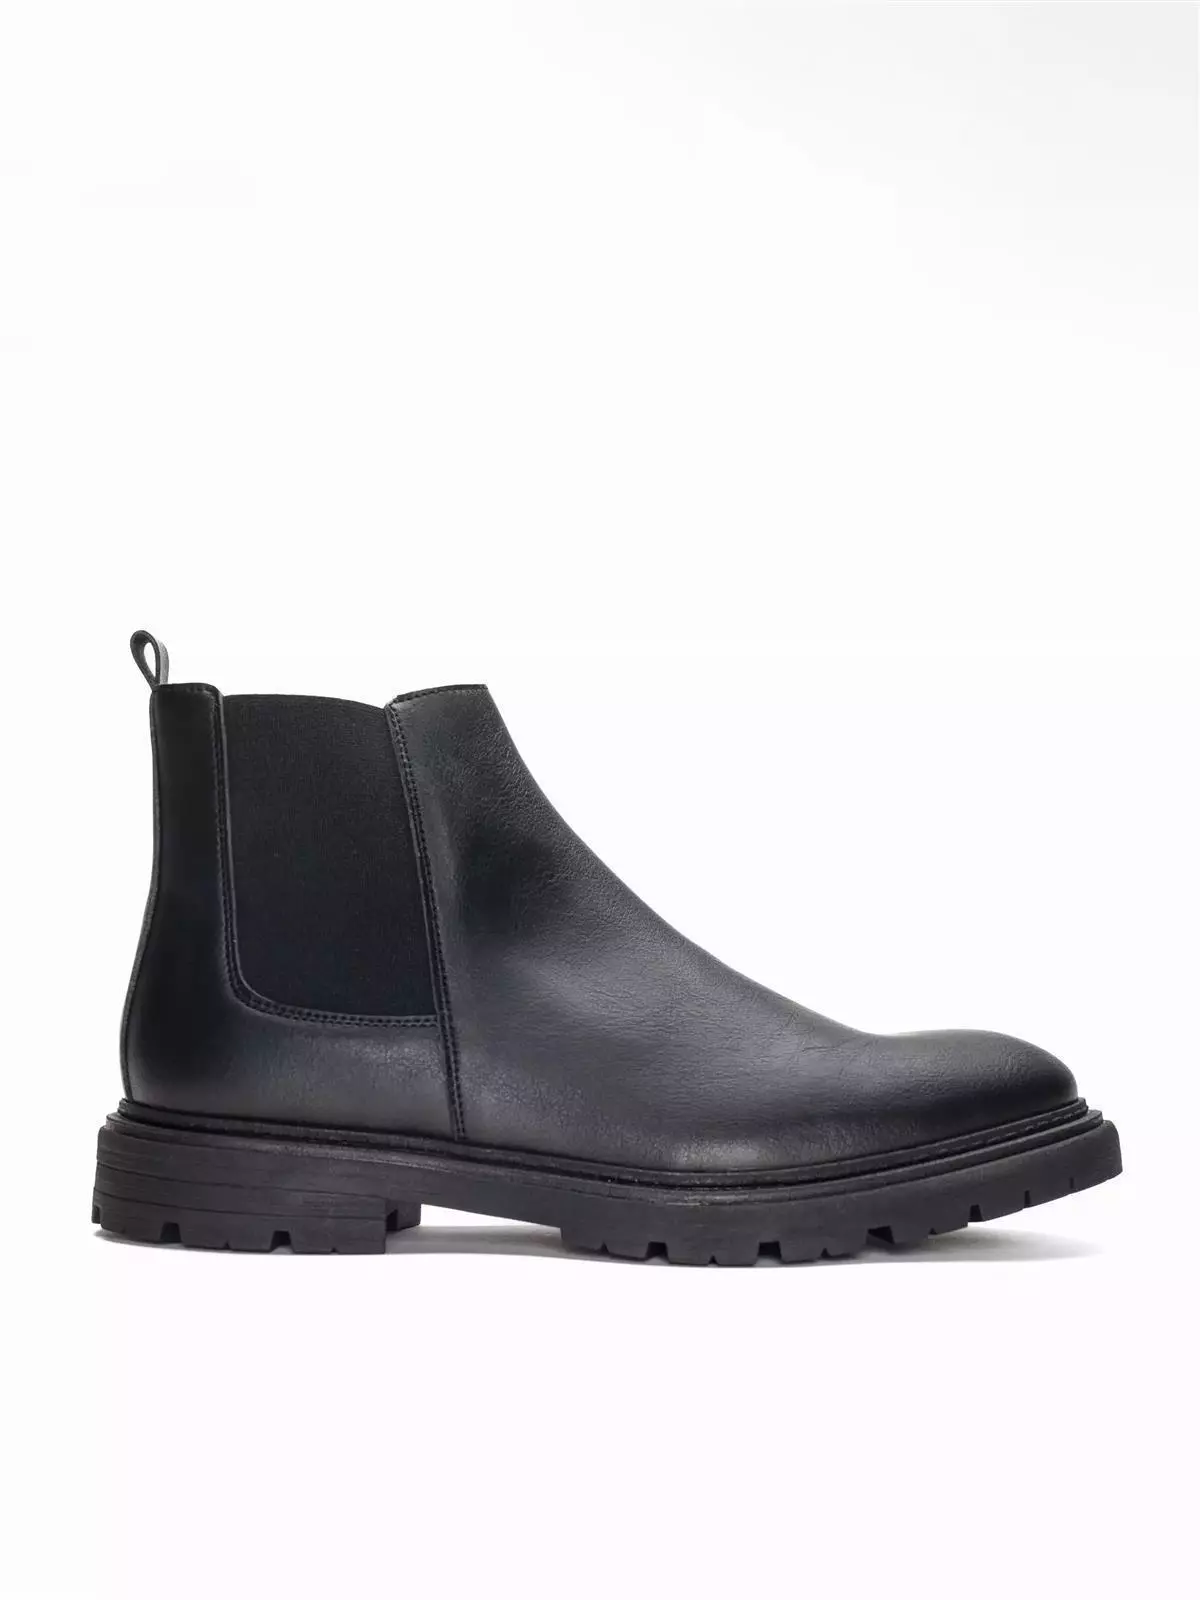 Chelsea-Boots Modell: Lukas